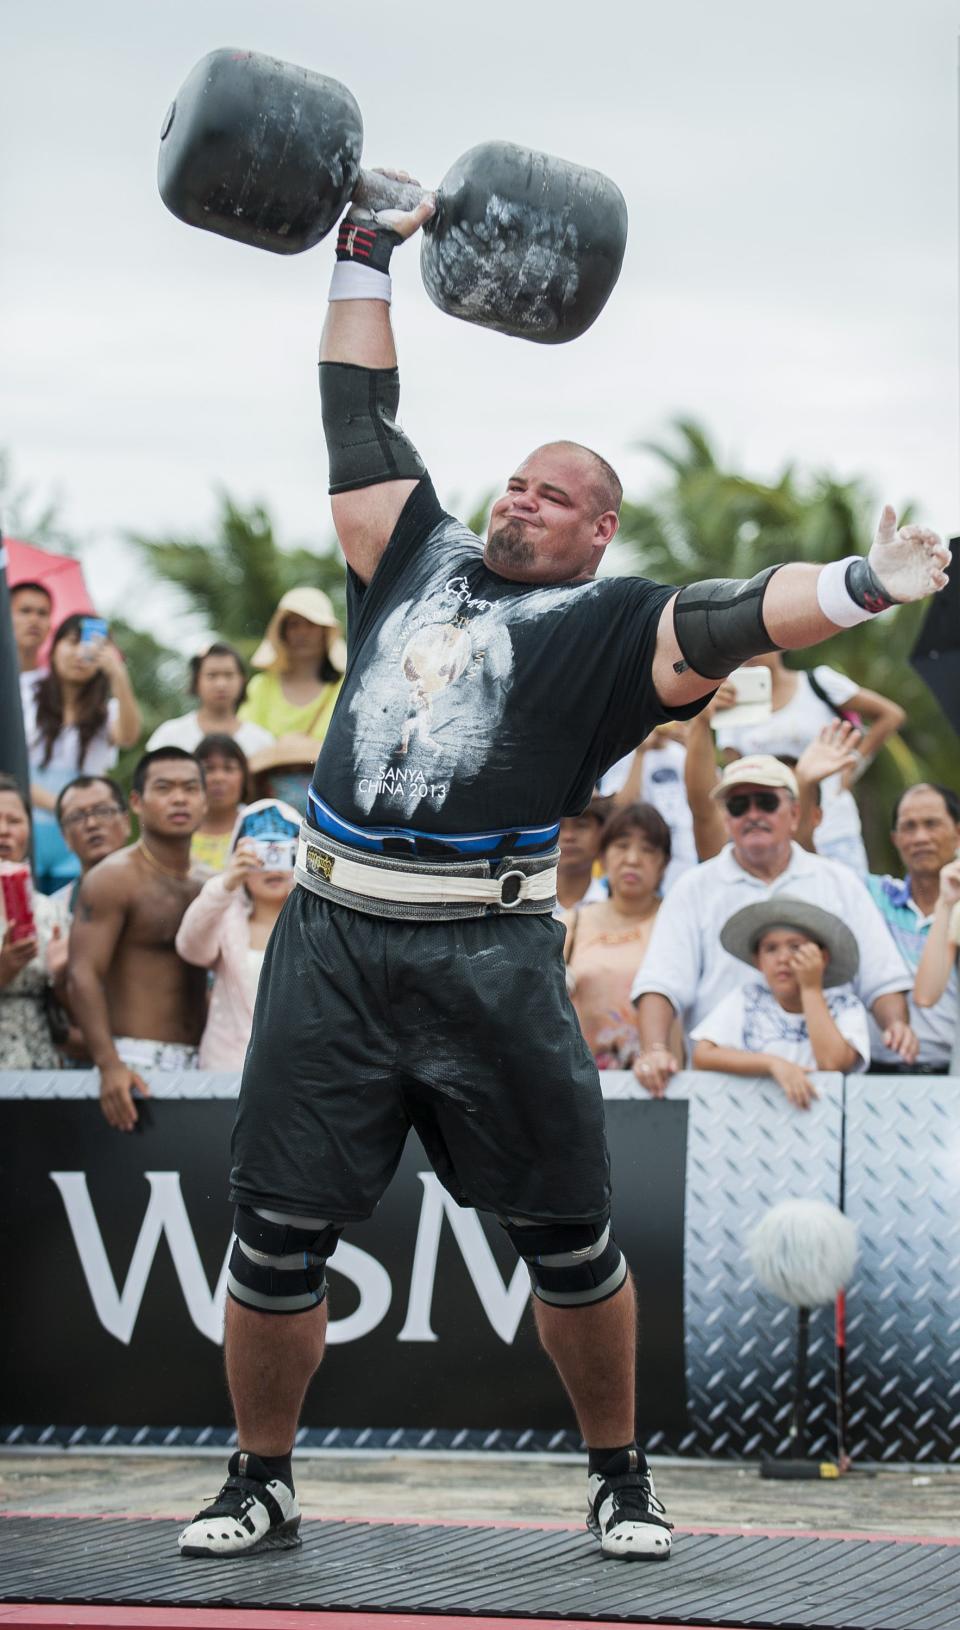 Brian Shaw of USA competes at the Circus Medley event during the World's Strongest Man competition at Yalong Bay Cultural Square on August 24, 2013 in Hainan Island, China.